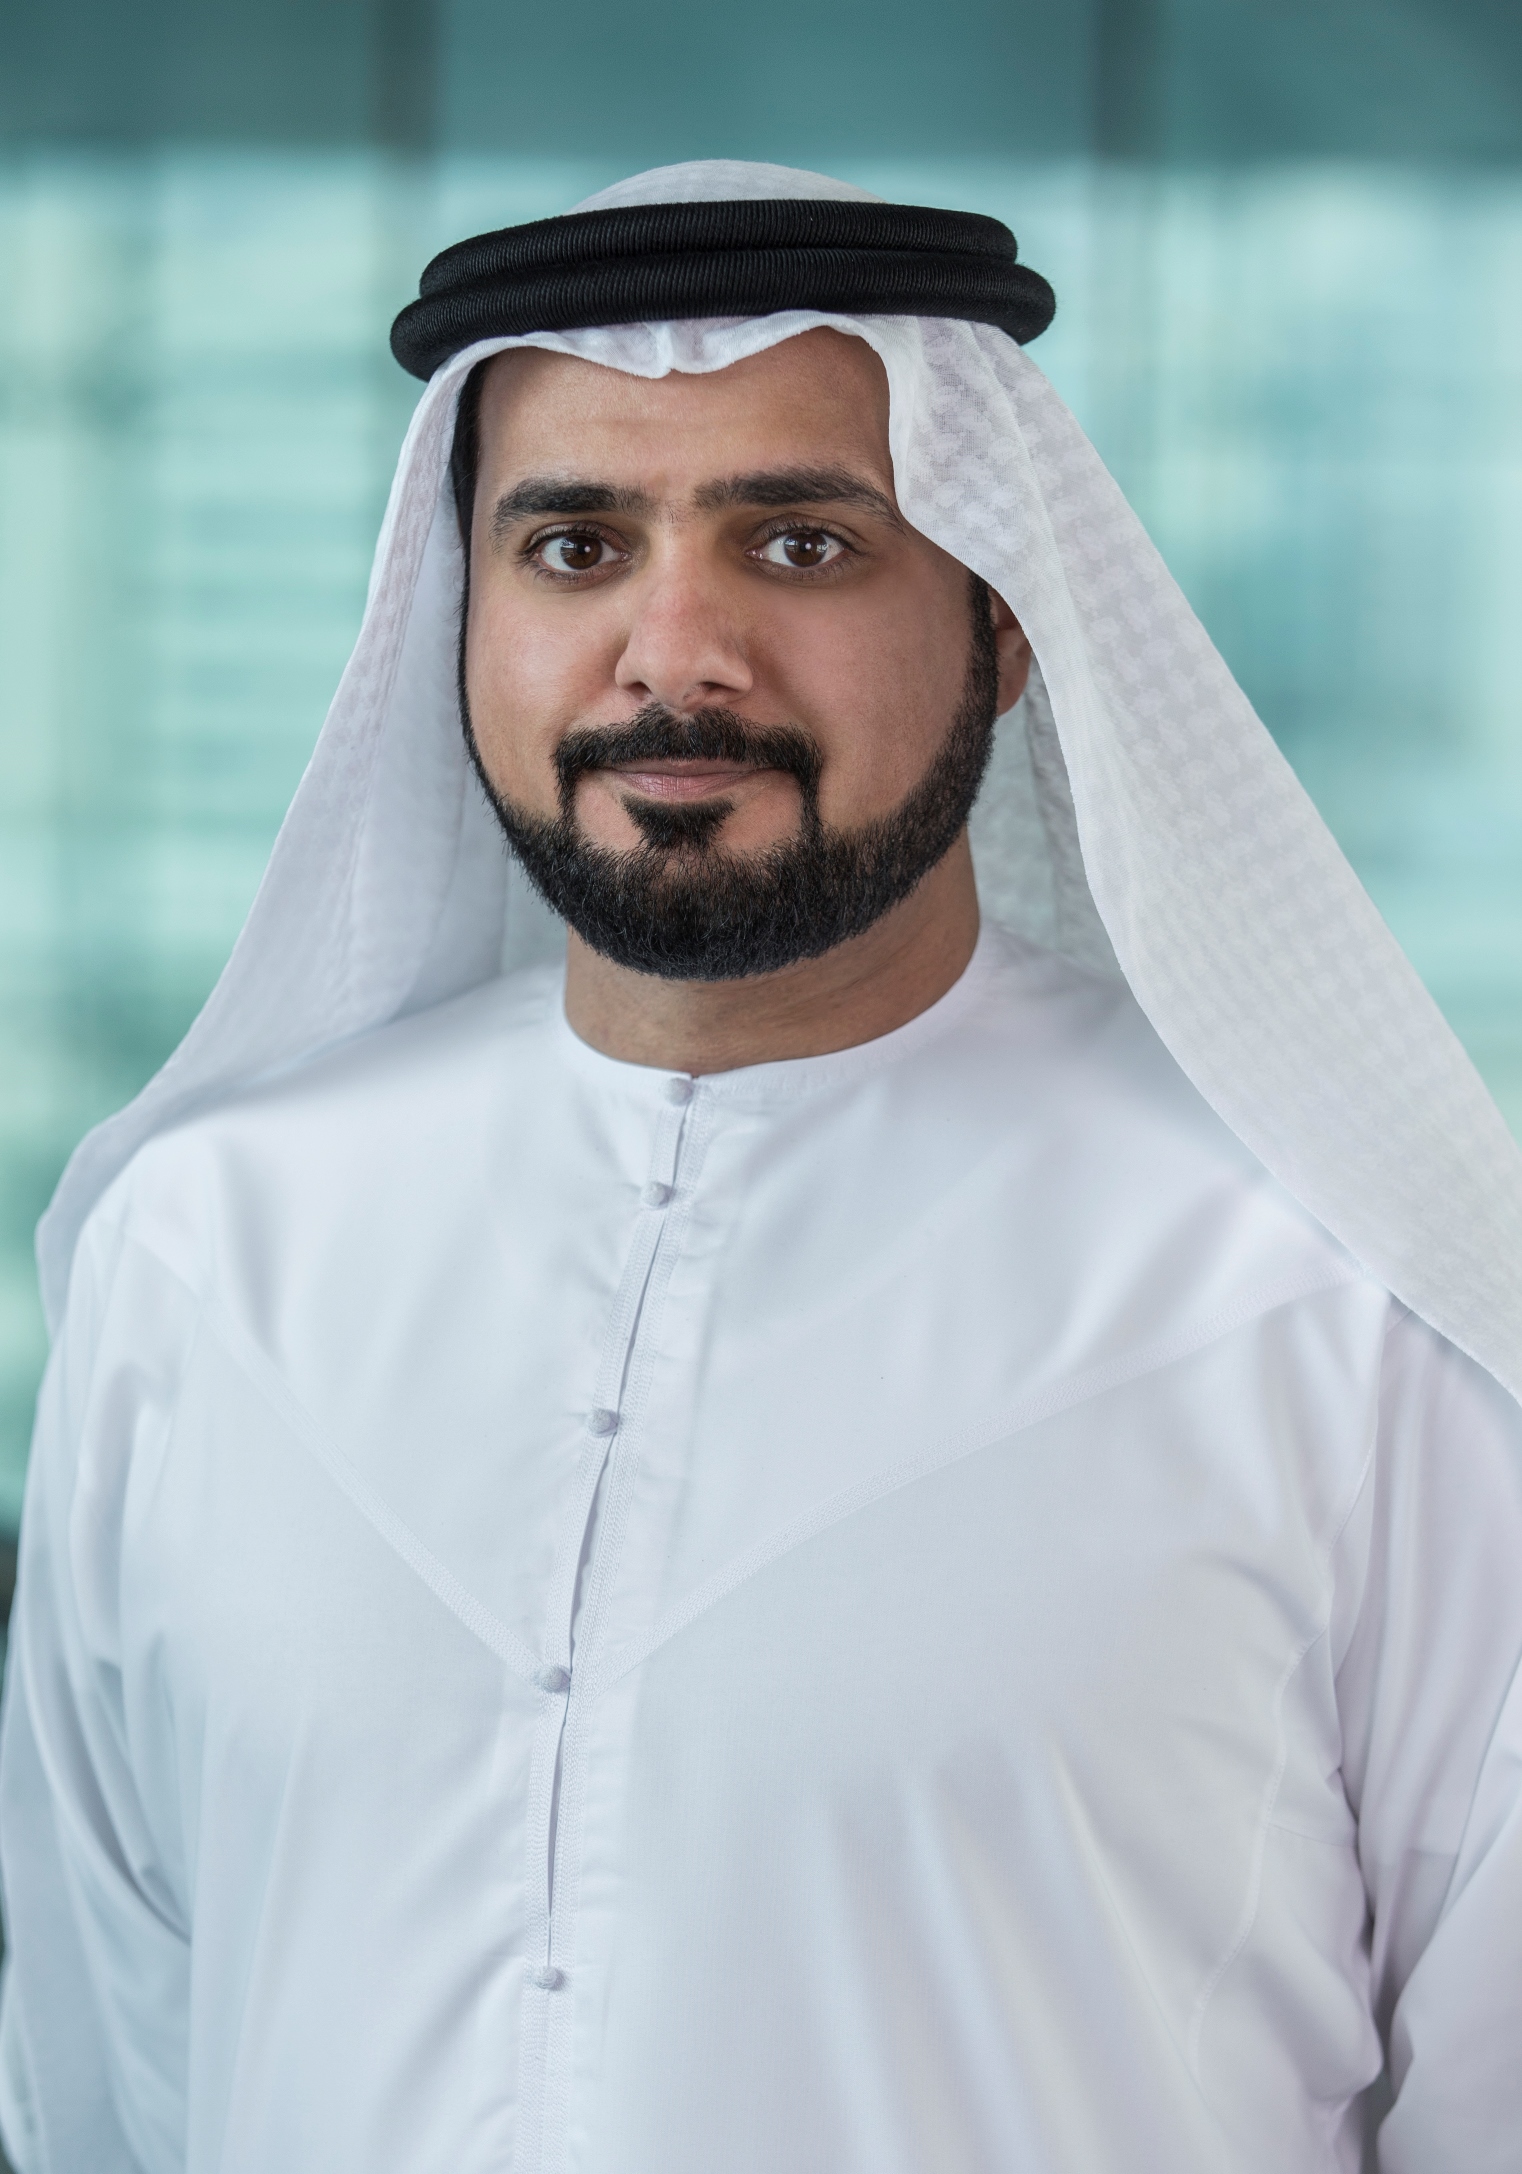 Chief Group Support Services Officer at Etihad Aviation Group, Mana Mohamed Saeed Al Mulla 